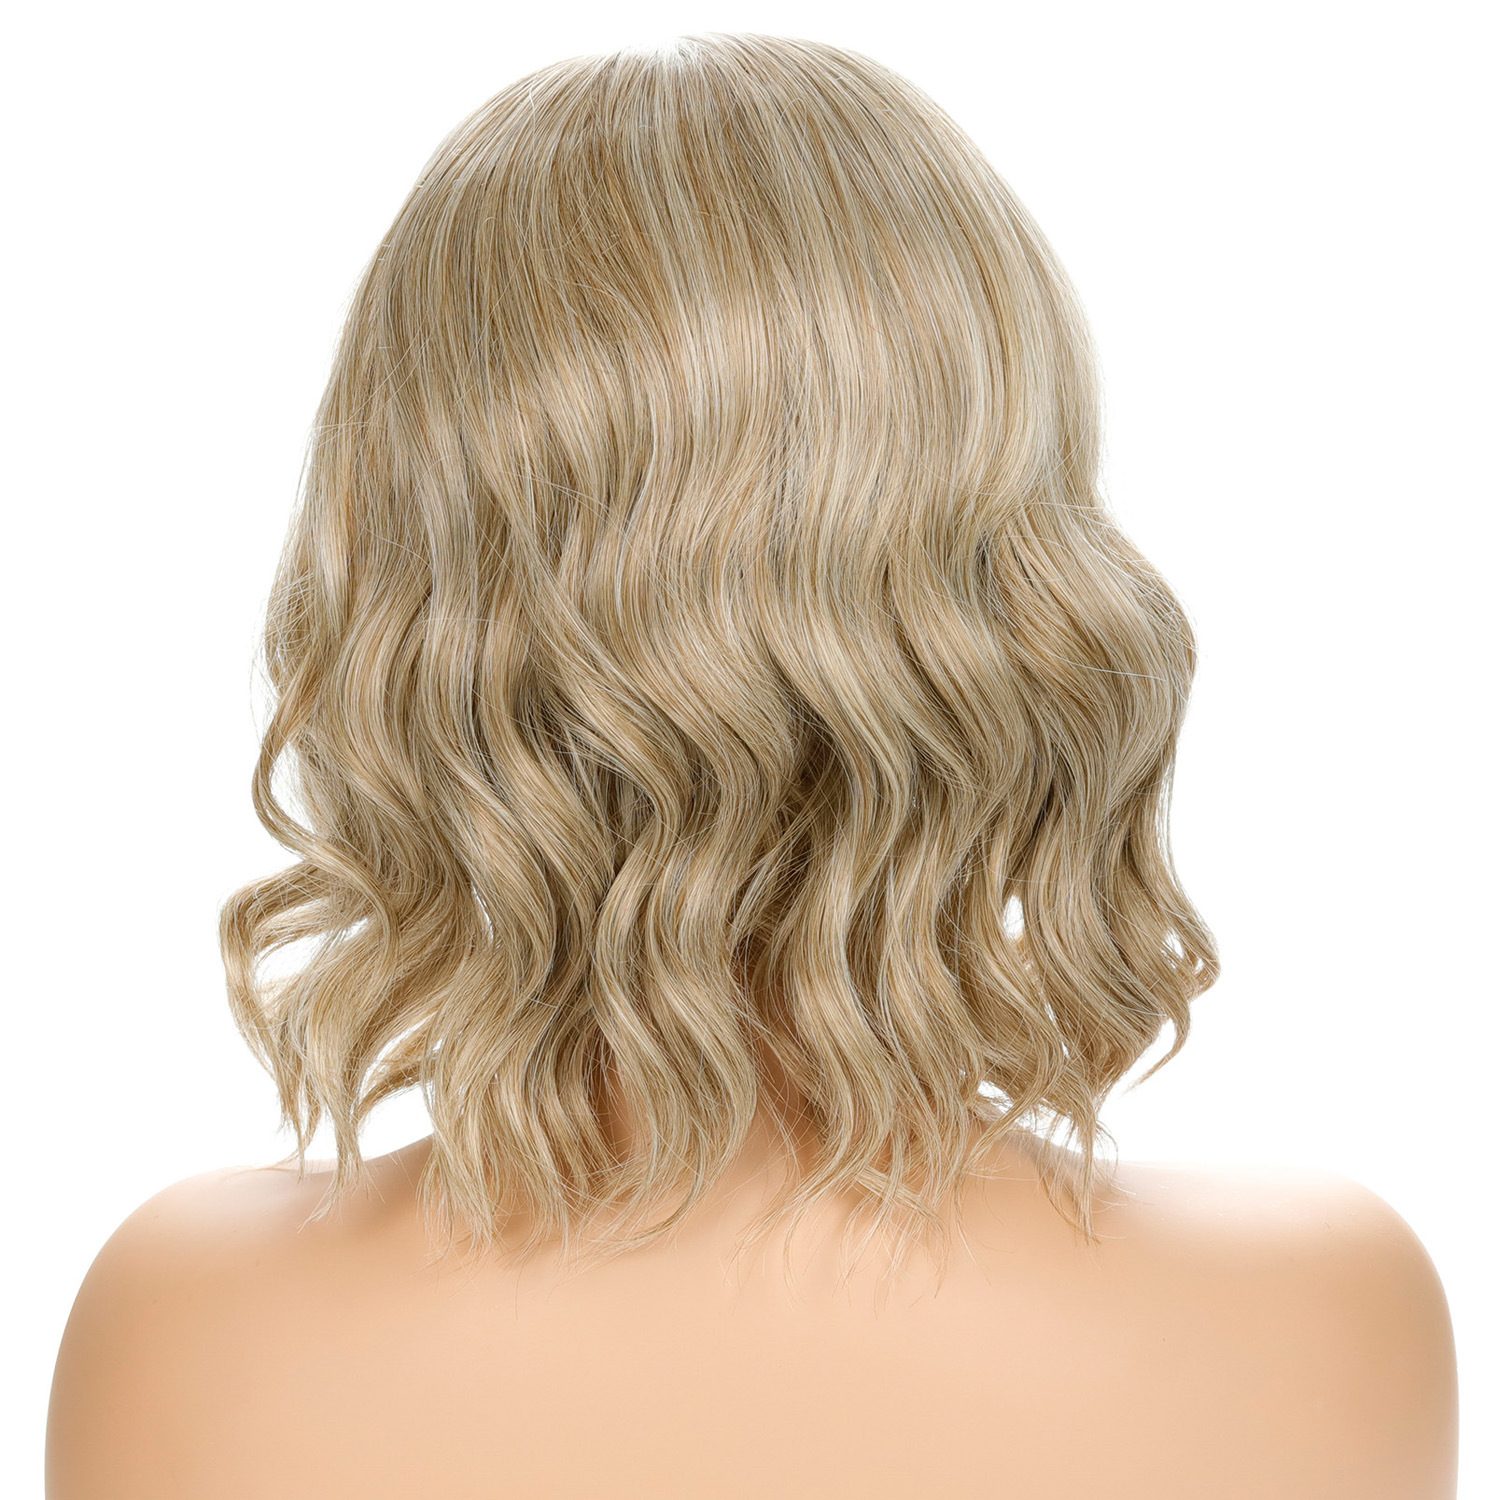 Fashionable blonde fashion synthetic wig designed for women, featuring wavy curly hair and mid-part